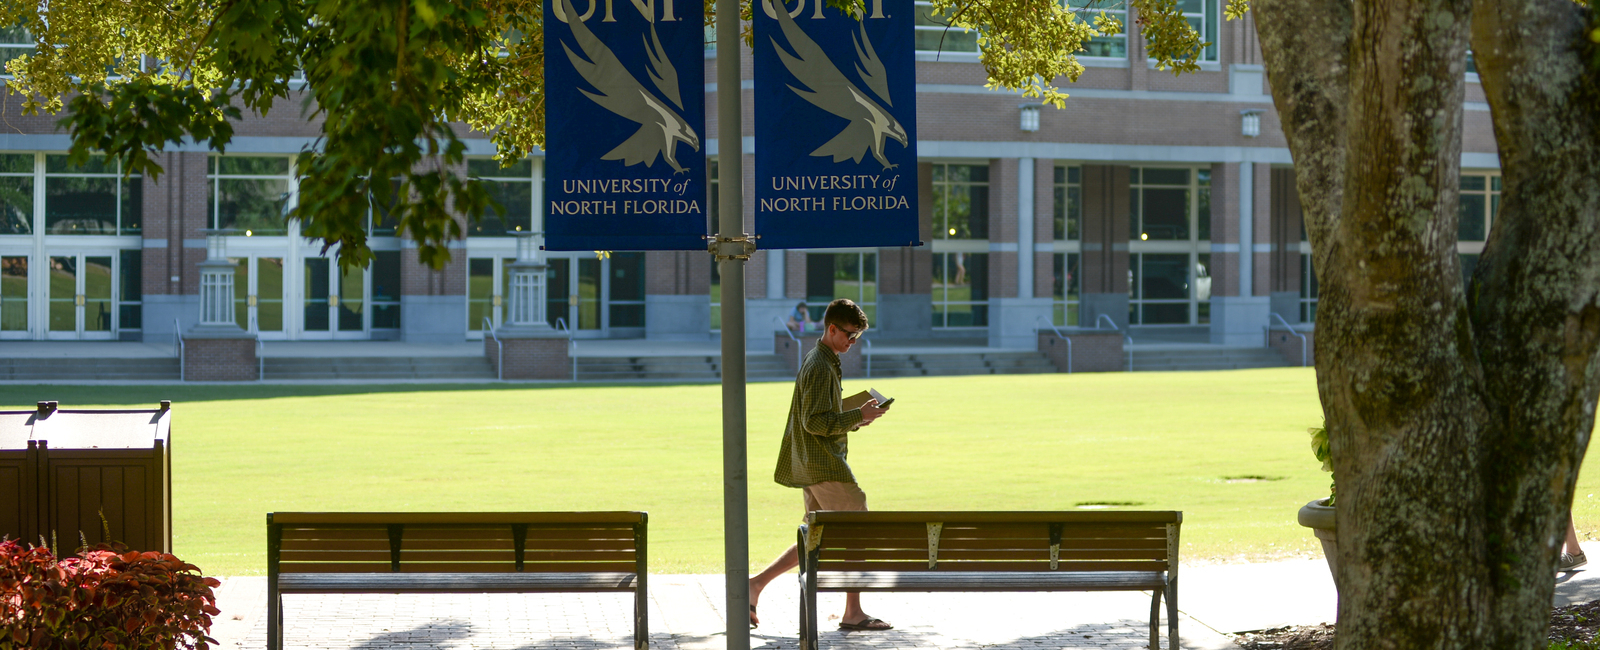 Male student walking through campus alone beside the green lawn with a building in the back